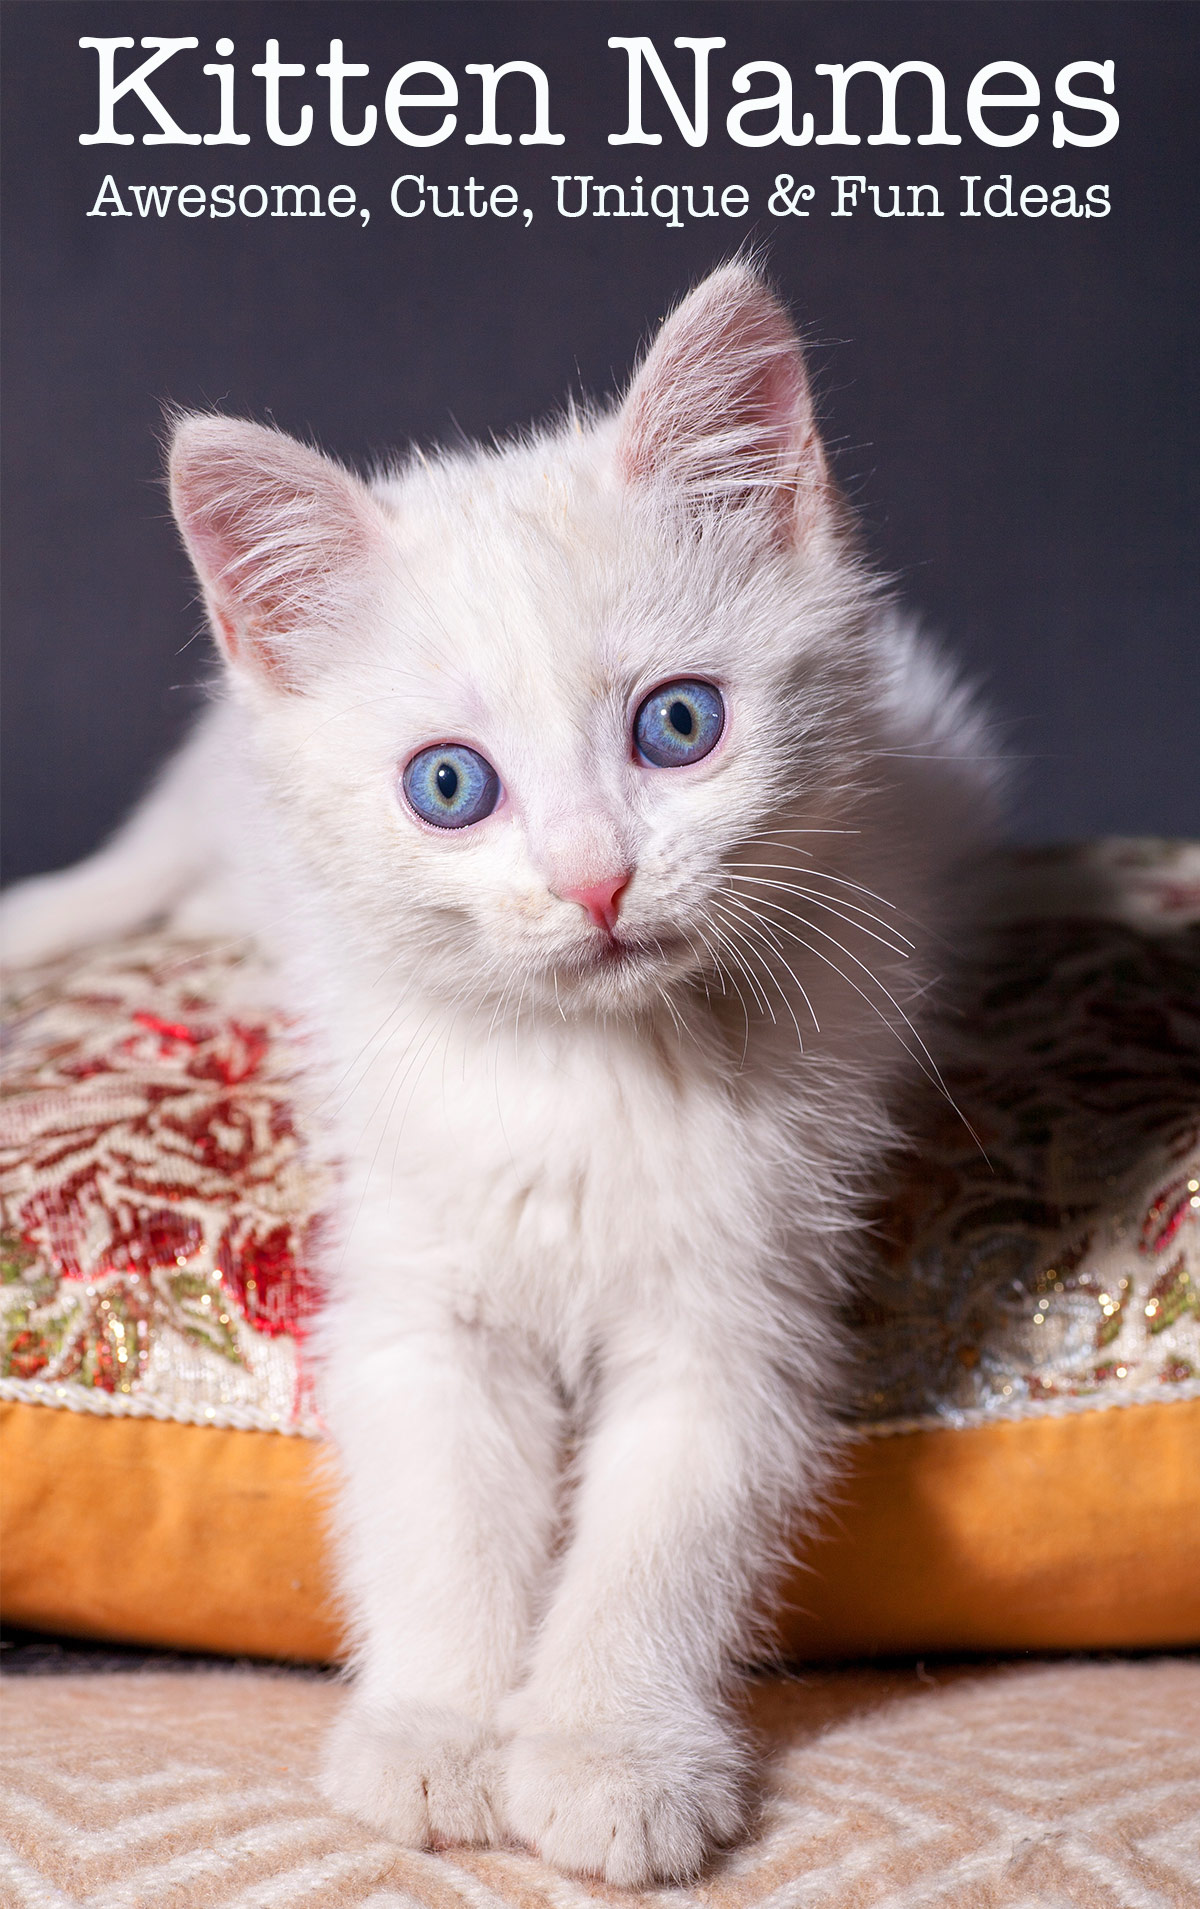 Kitten Names - Adorable, Awesome And Unusual Ideas For Naming Your Cat